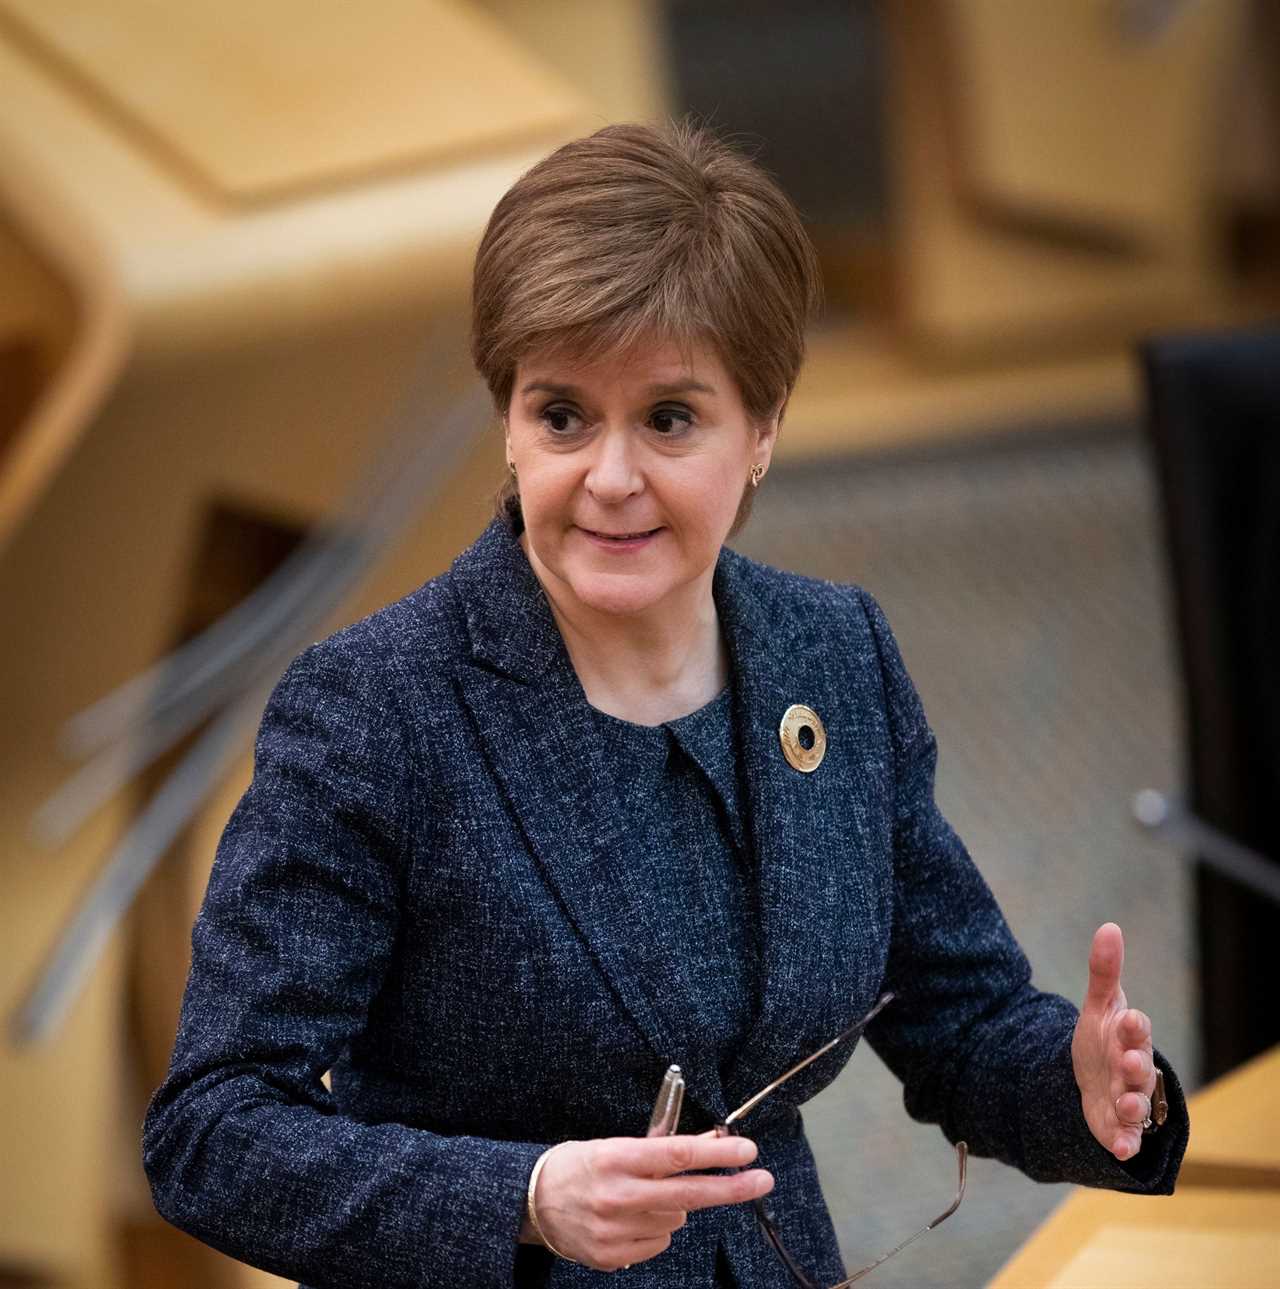 Nicola Sturgeon under fire for saying the UK’s jab rollout success has little to do with Brexit